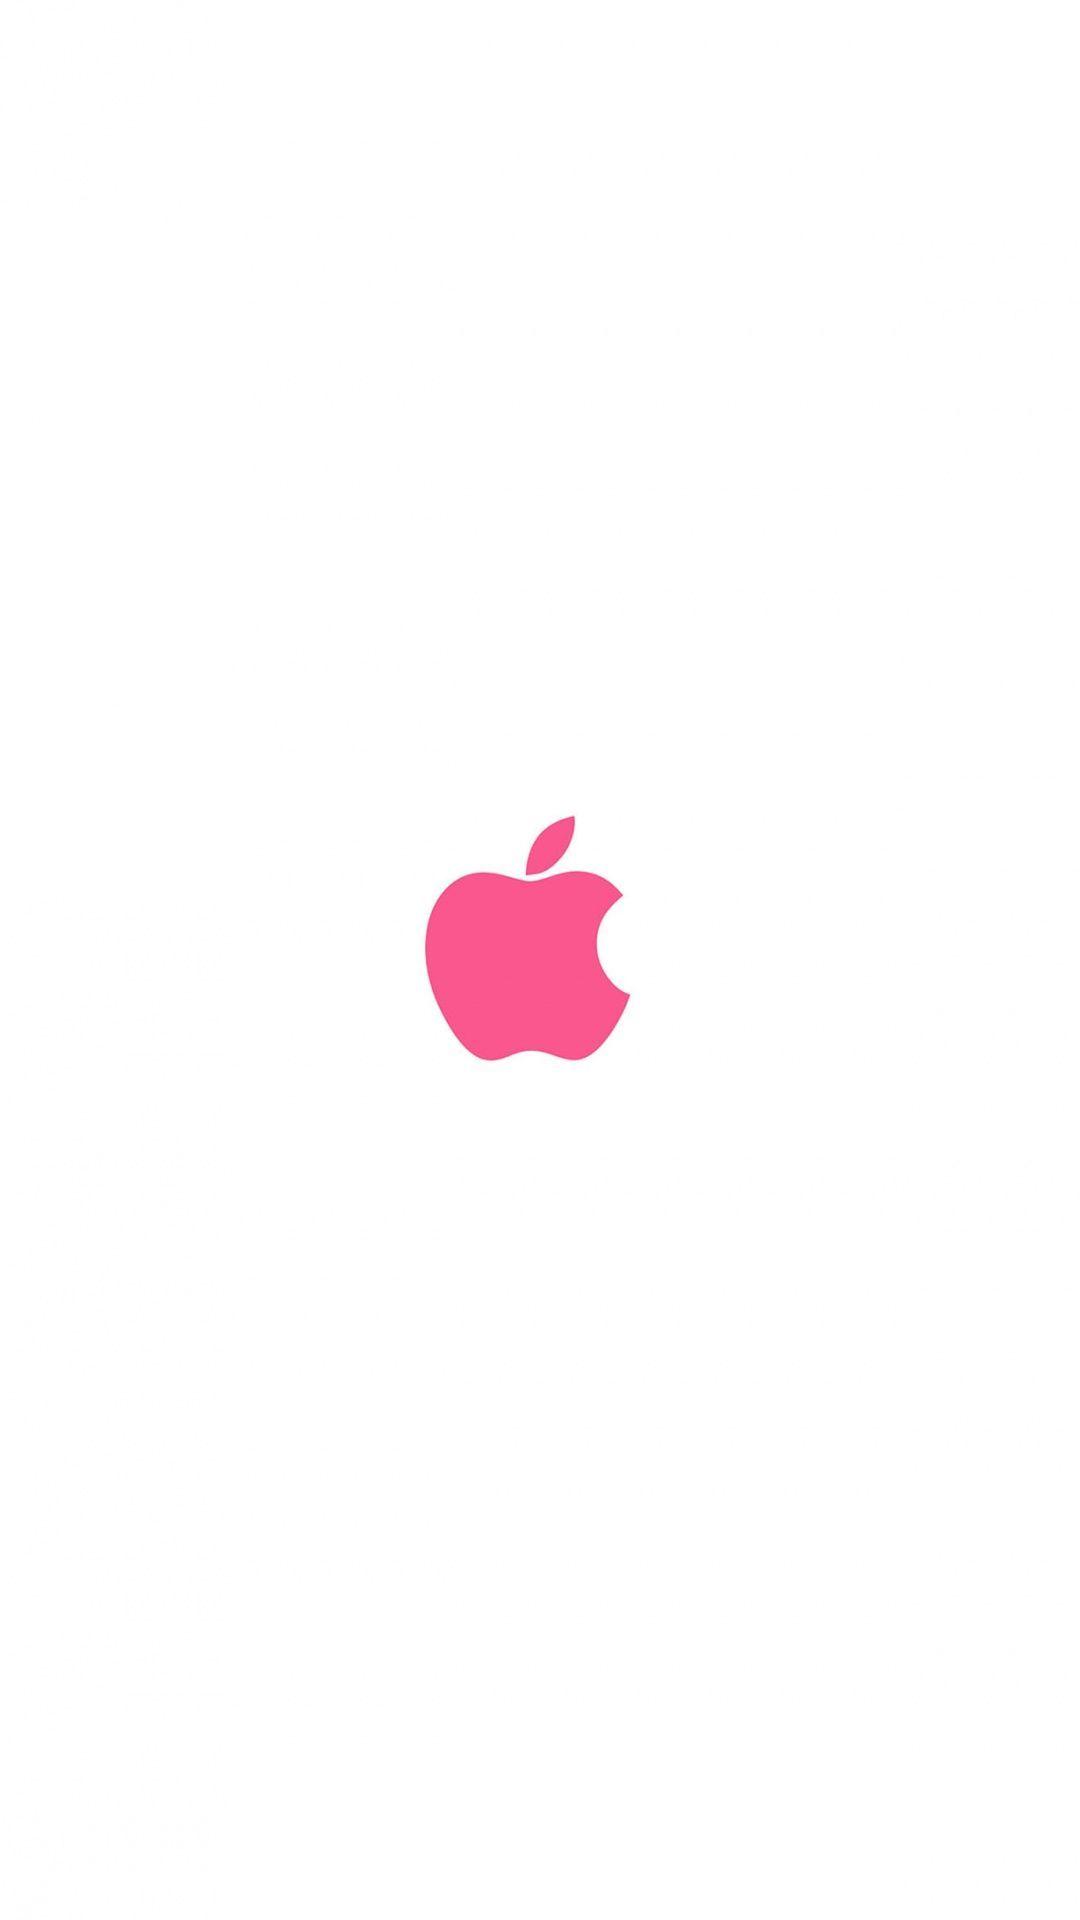 PinkAppleLogo Wallpaper  Download to your mobile from PHONEKY